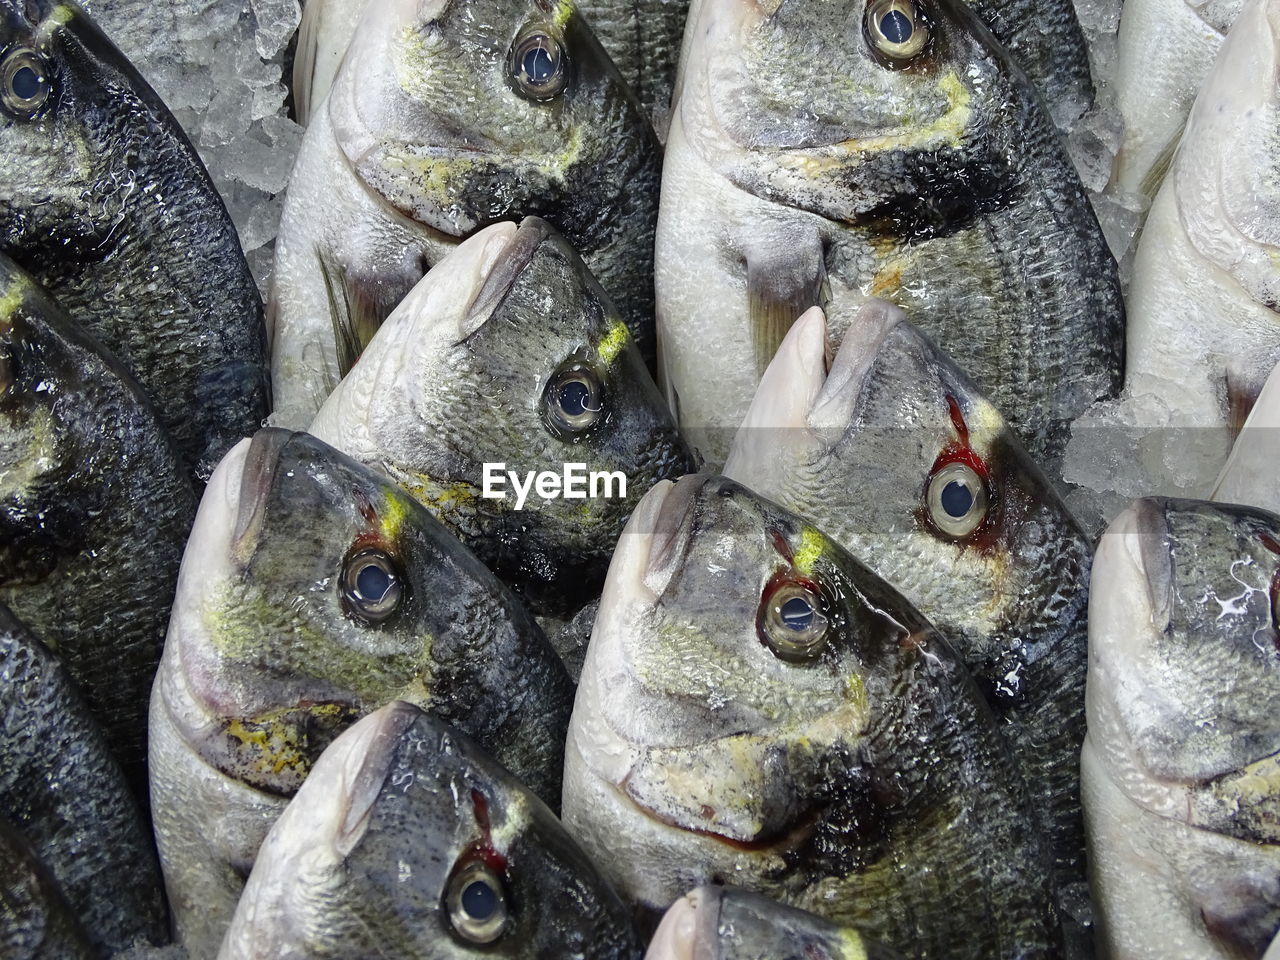 HIGH ANGLE VIEW OF FISH FOR SALE